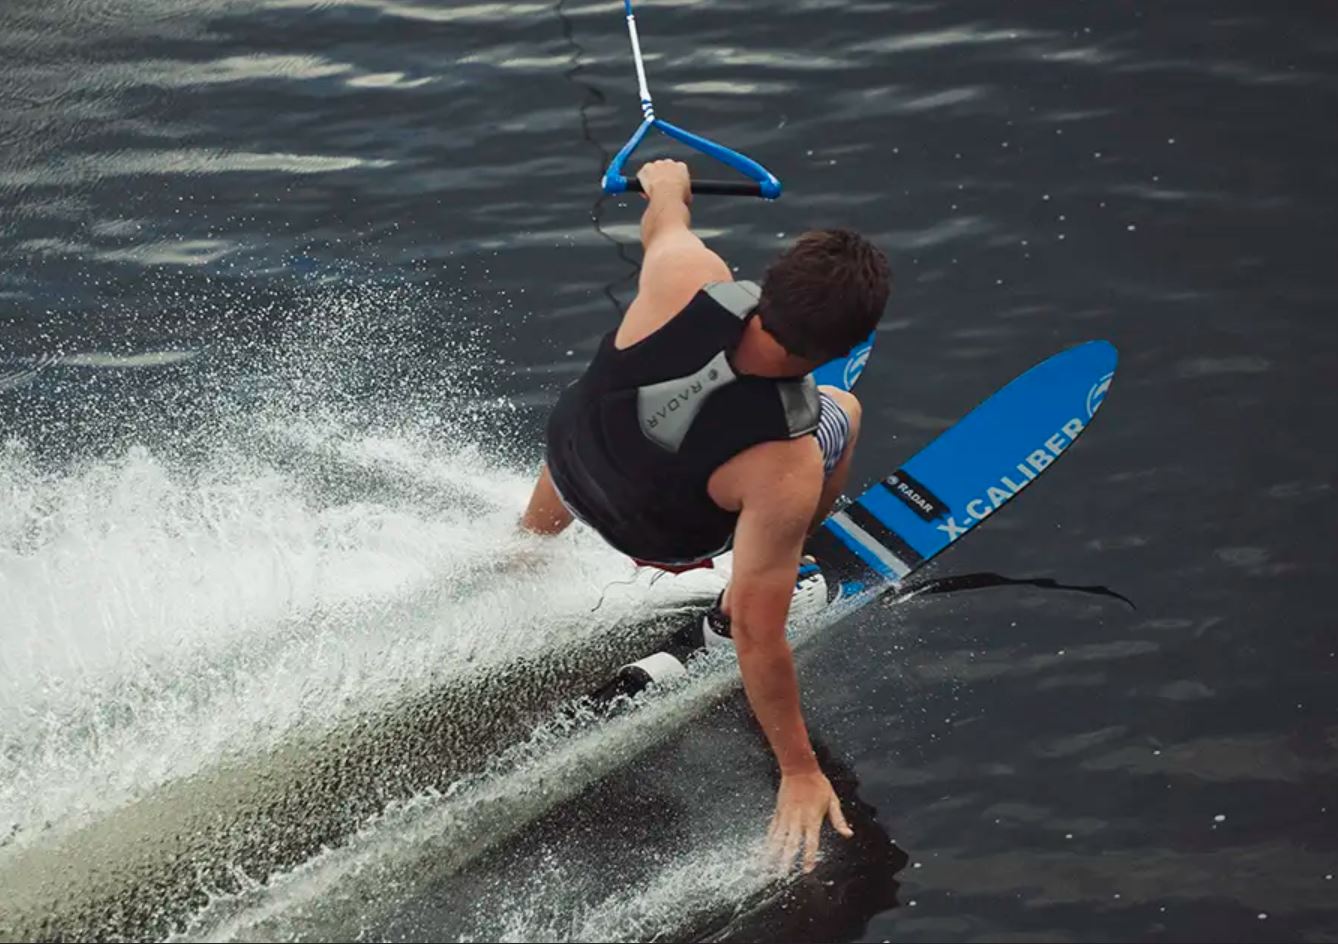 How to Select the Right Water Skis